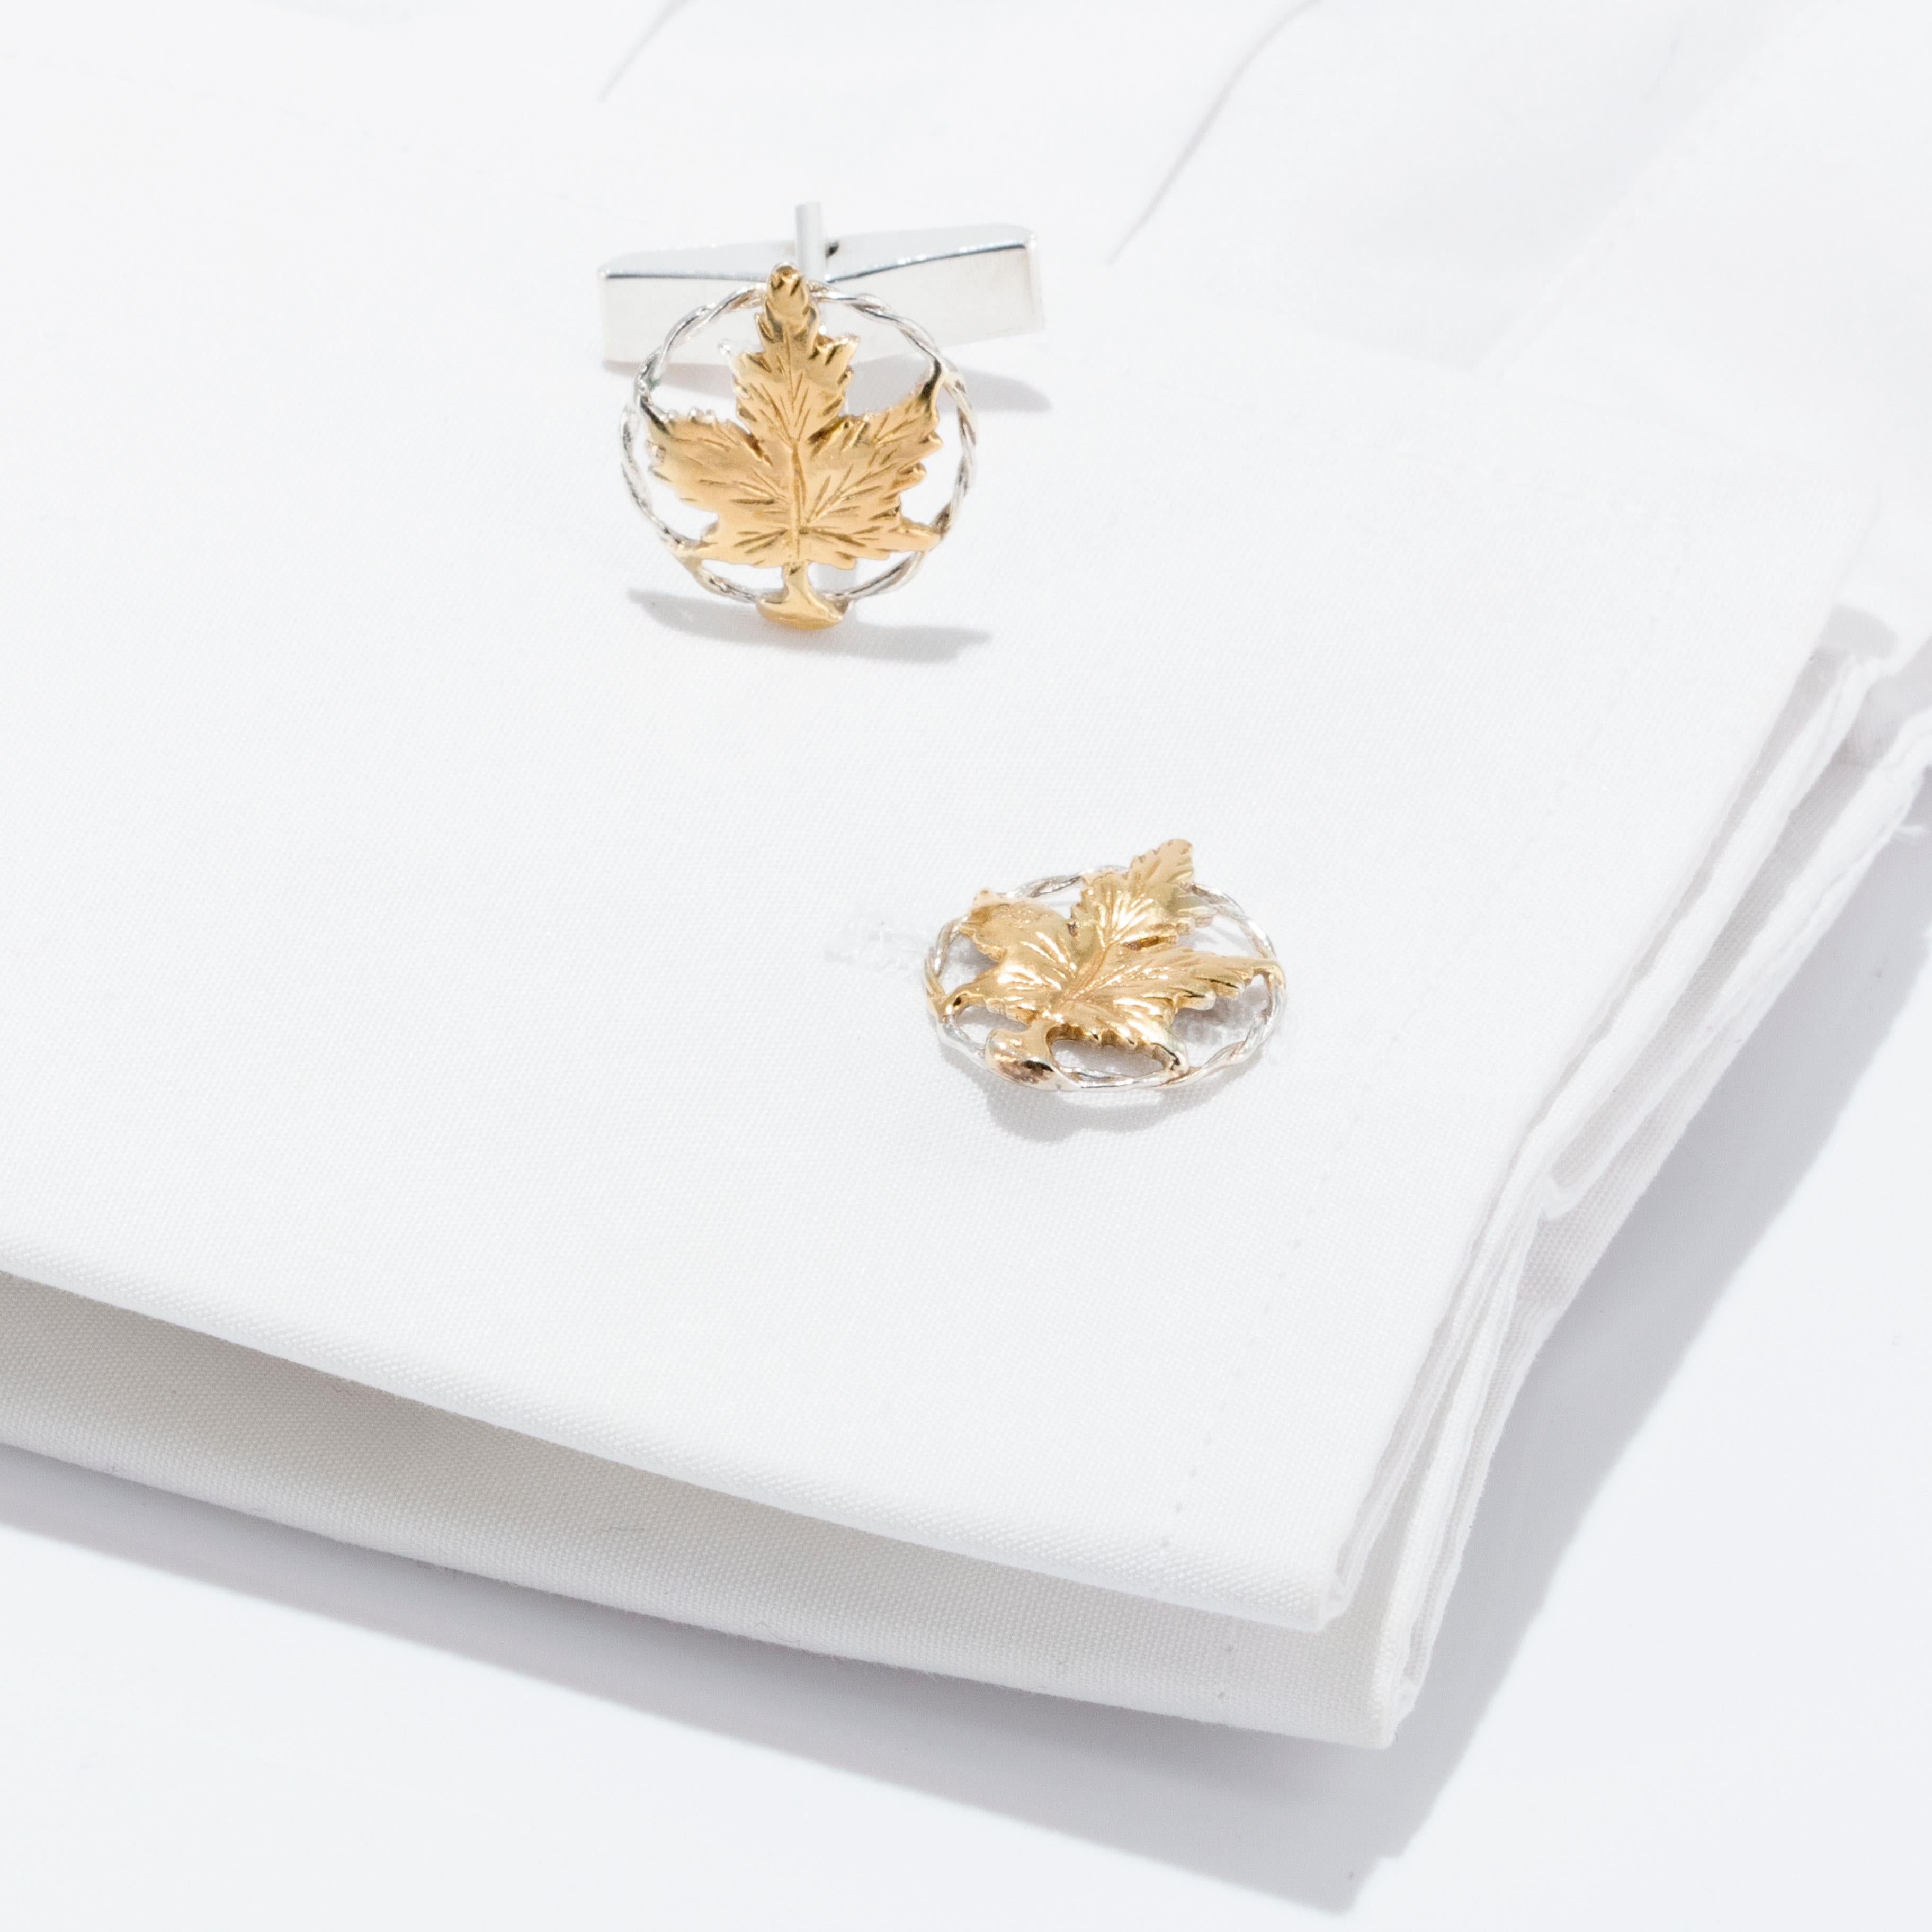 Stunning Maple Leaf cufflinks in 18 karat Gold on Sterling Silver, for the proud Canadian gentleman.

As befits this classic Maple Leaf cufflinks, a thick layer of 18k Gold has been used to draw out the details of this beautiful design. The Gold and